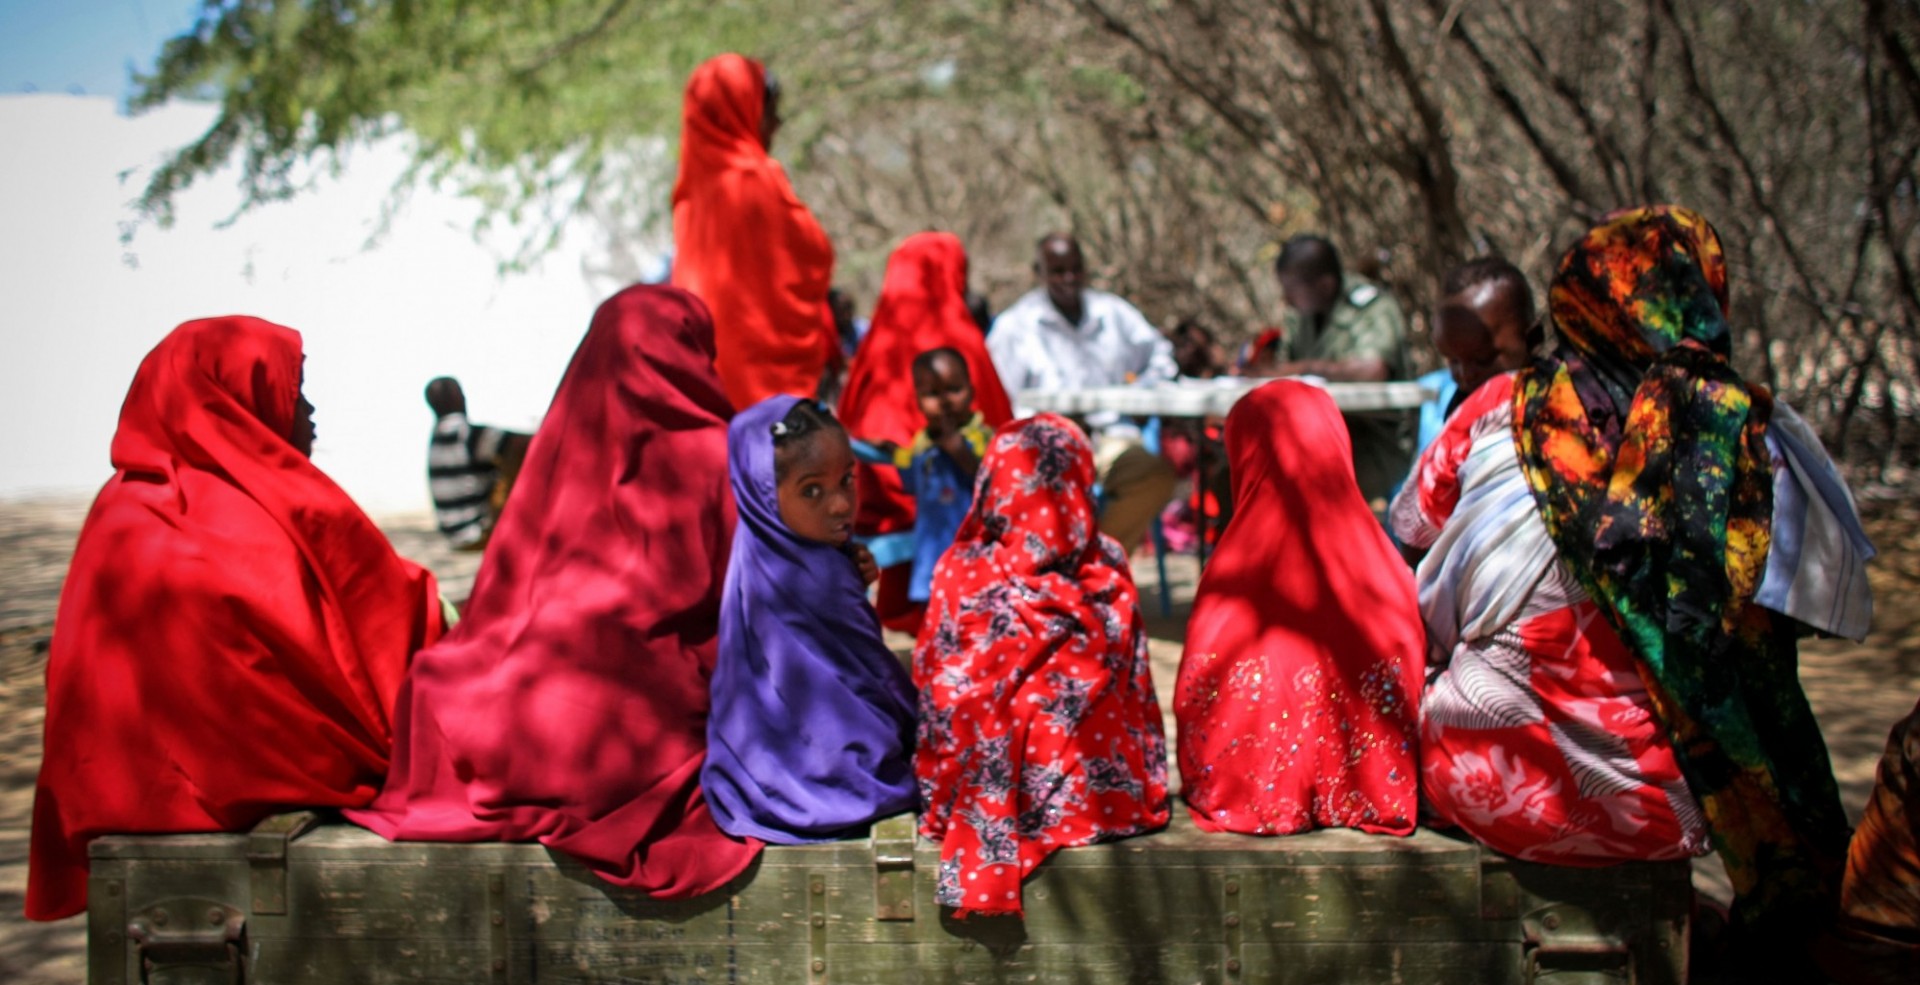 Somali women and girls wait to see a Burundian medical officer serving with the African Union Mission in Somalia